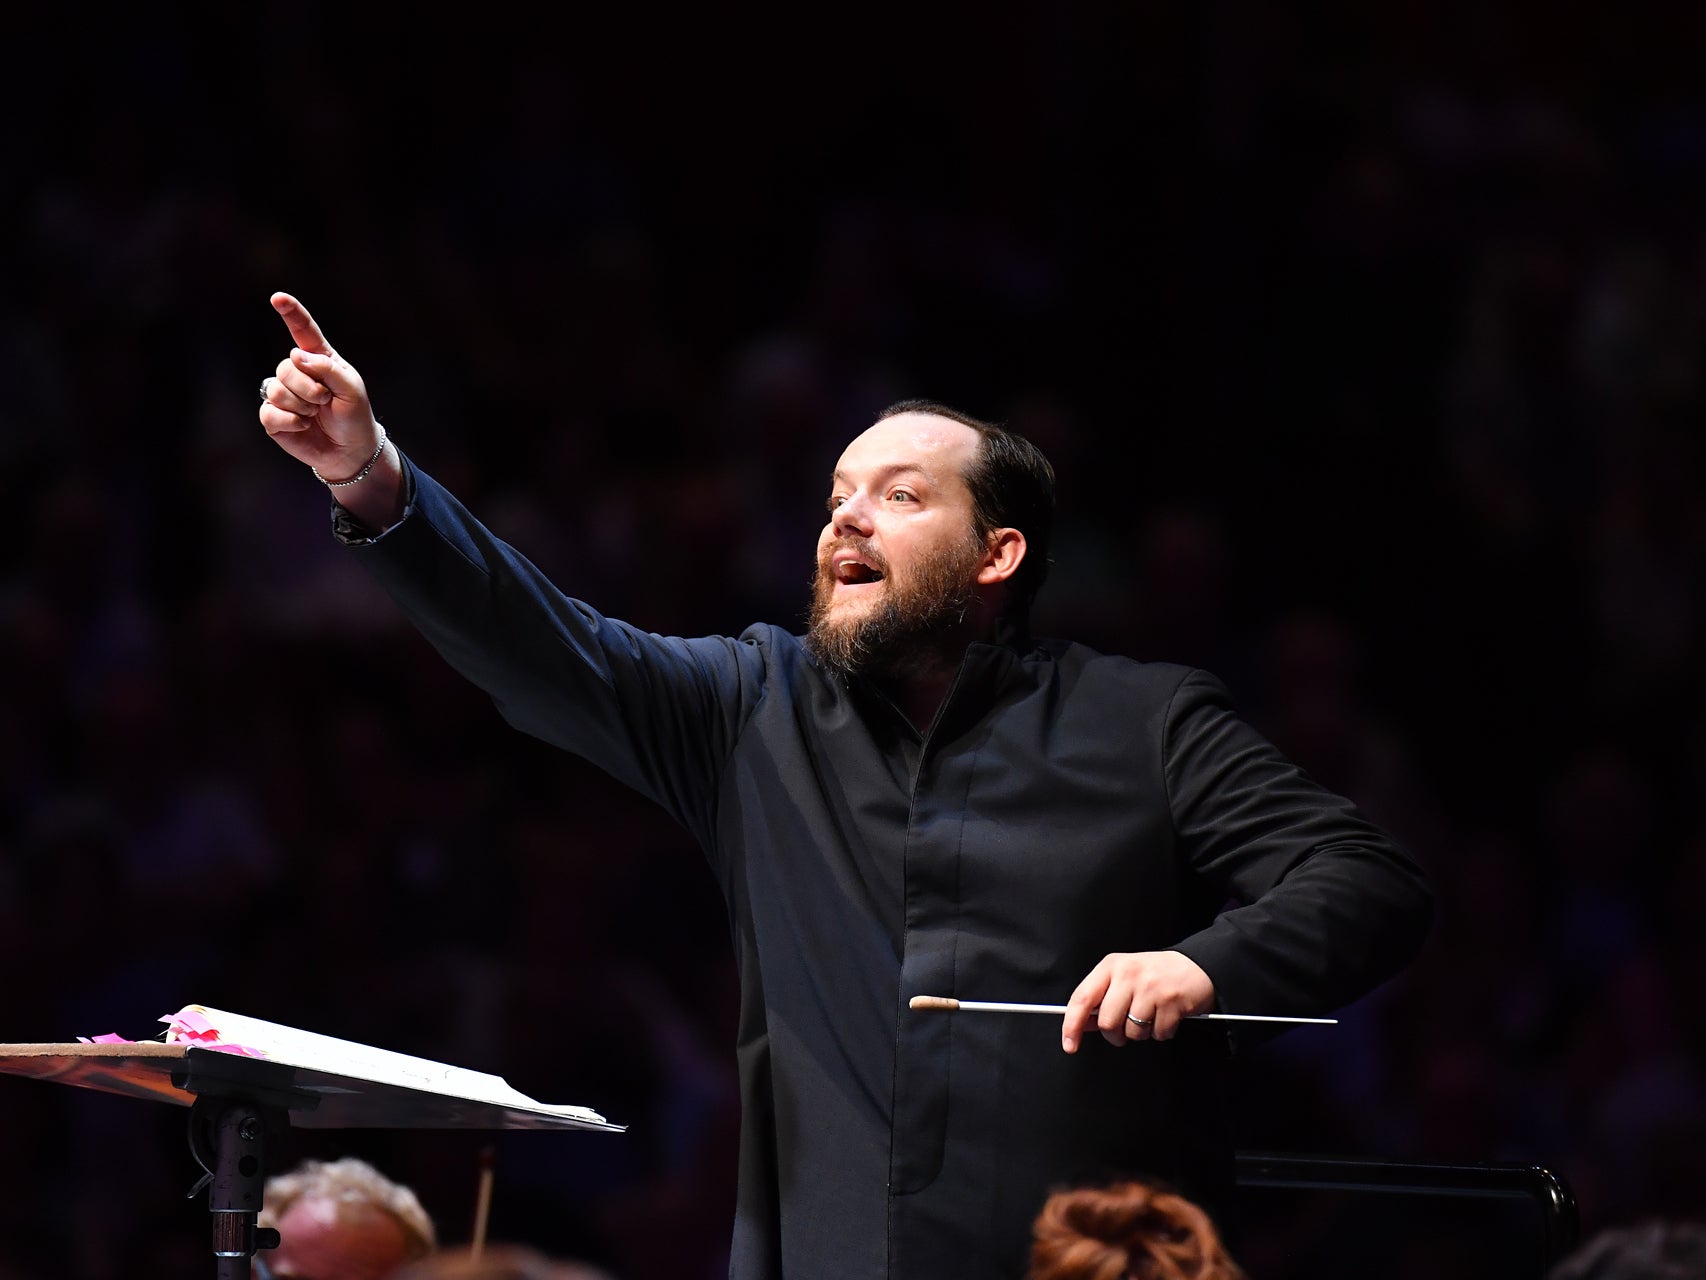 The Leipzig Gewandhaus Orchestra returned to the Proms for the first time under new Music Director Andris Nelsons.